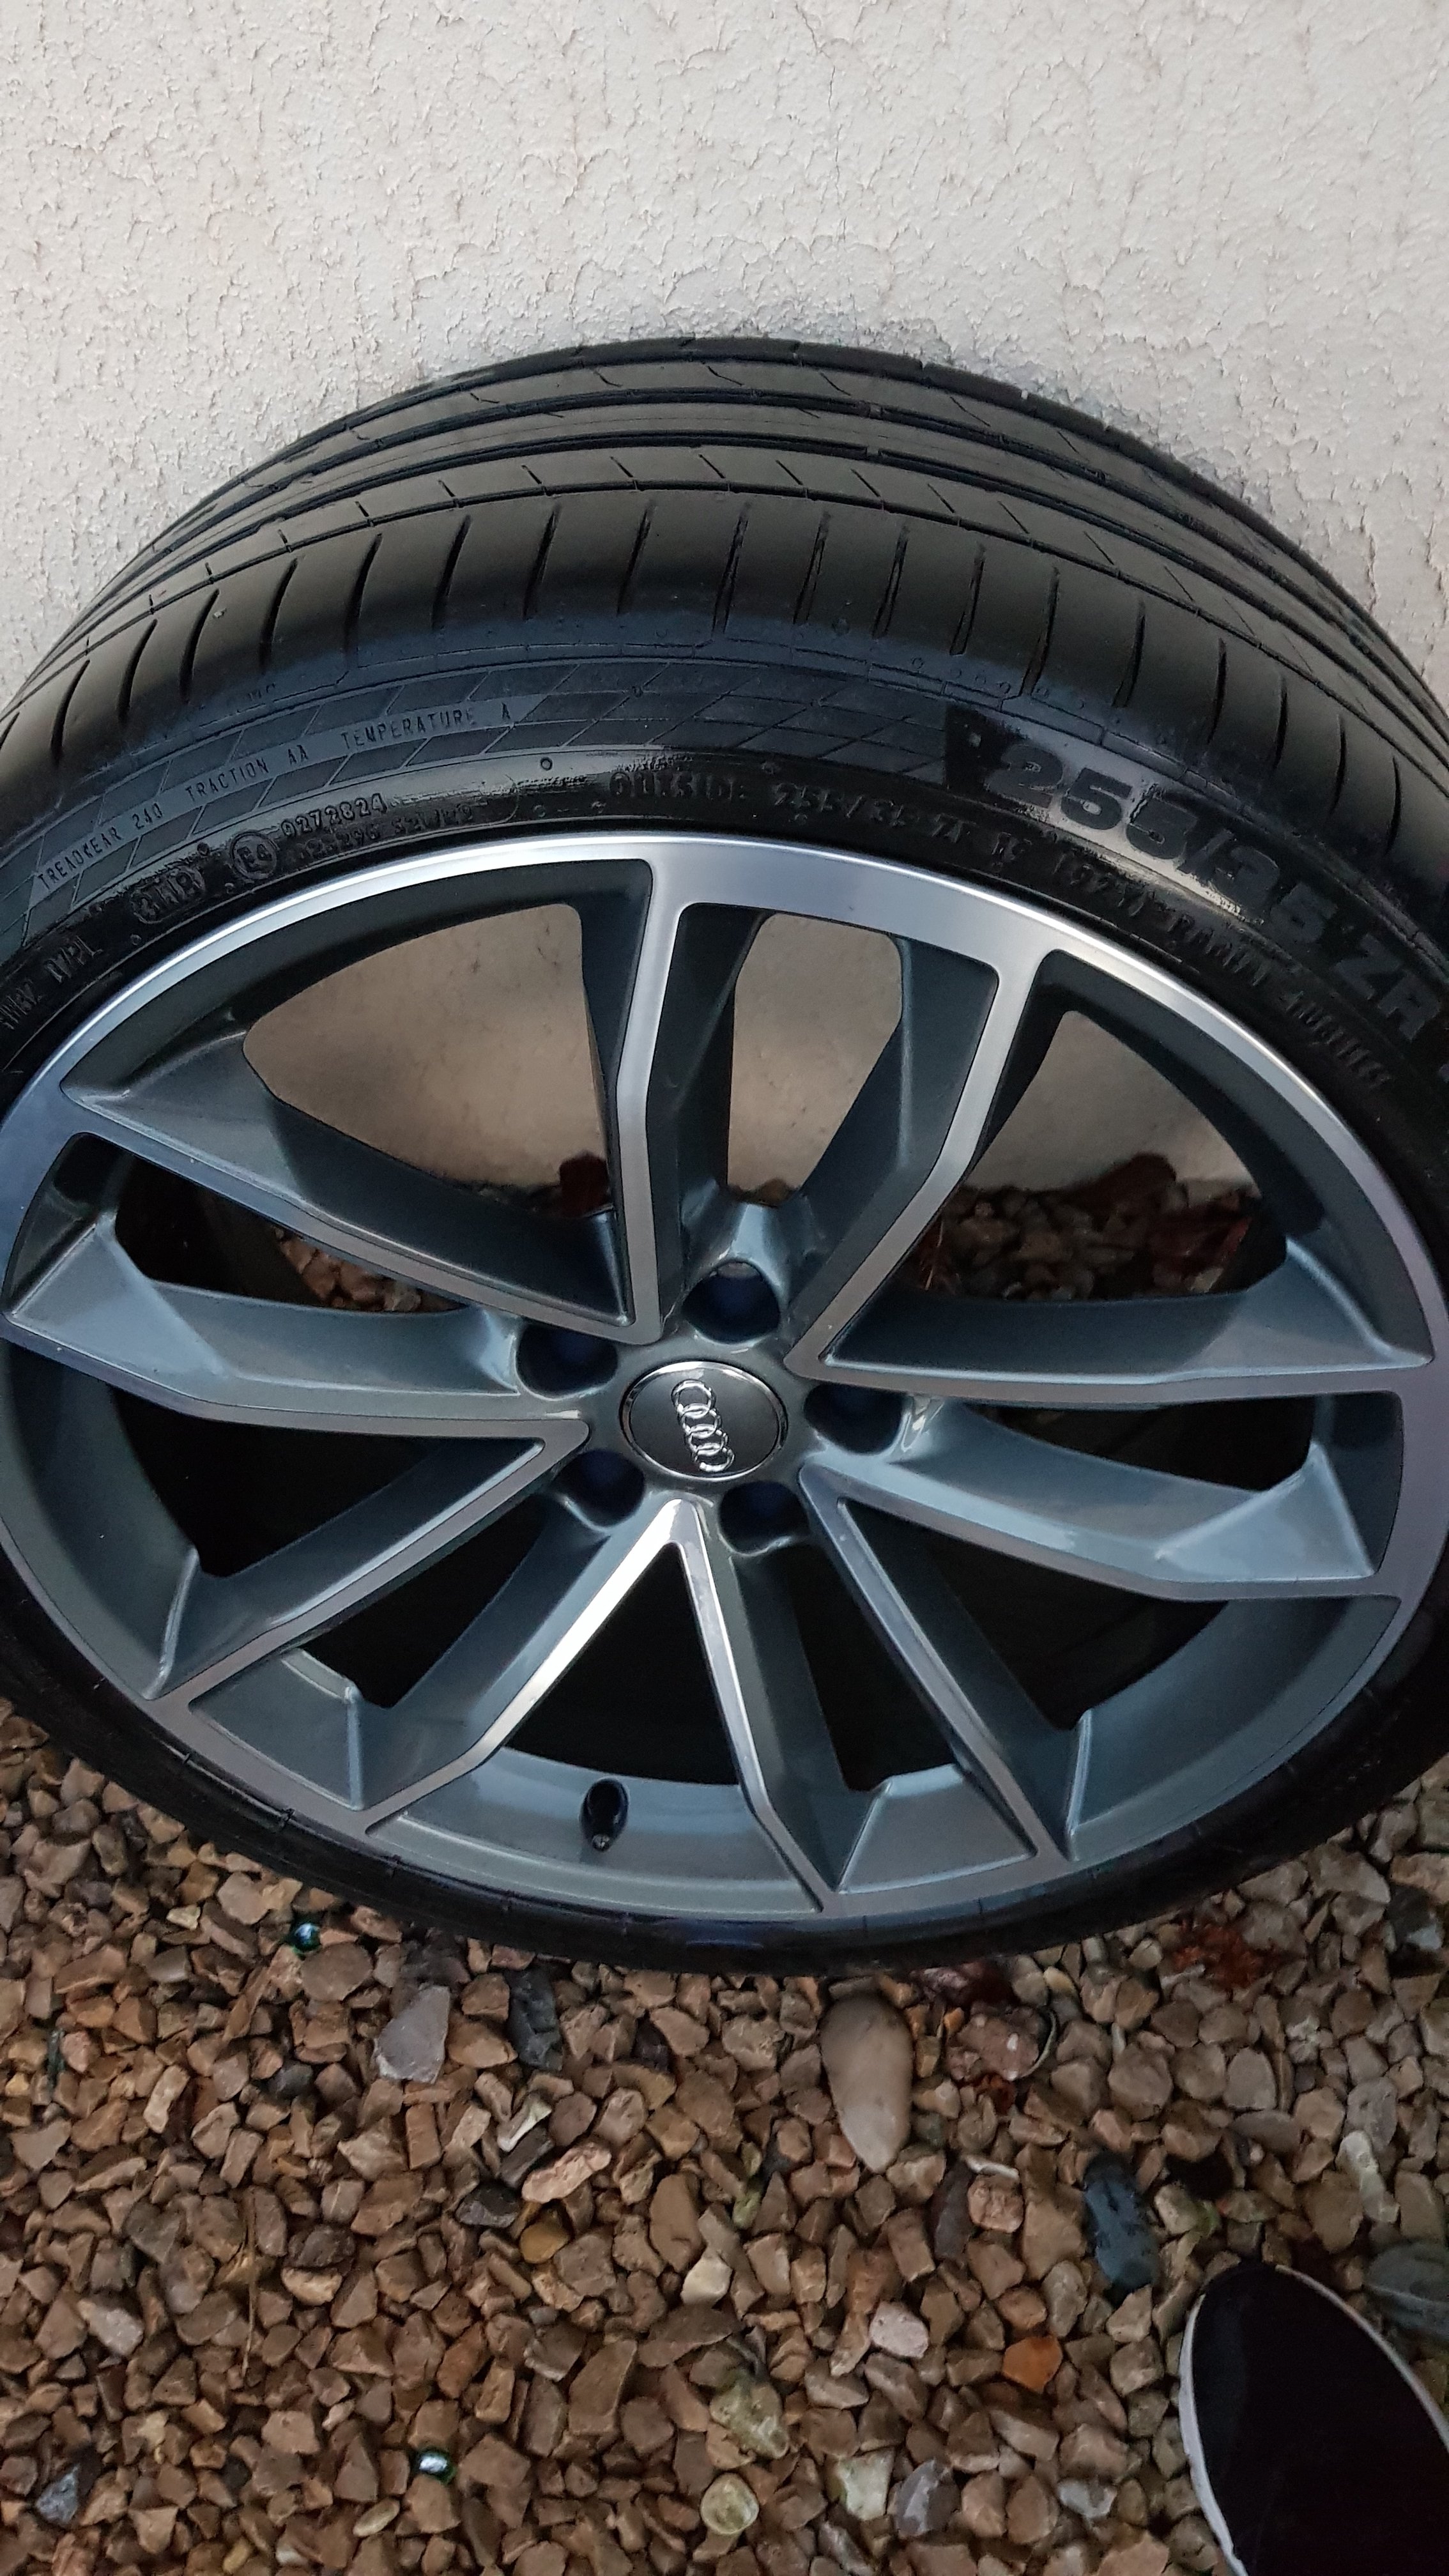 Sold - Genuine 19" Audi S5 B9 2018 Cavo Alloys with Continental Sport 5 Tyres. | Audi-Sport.net